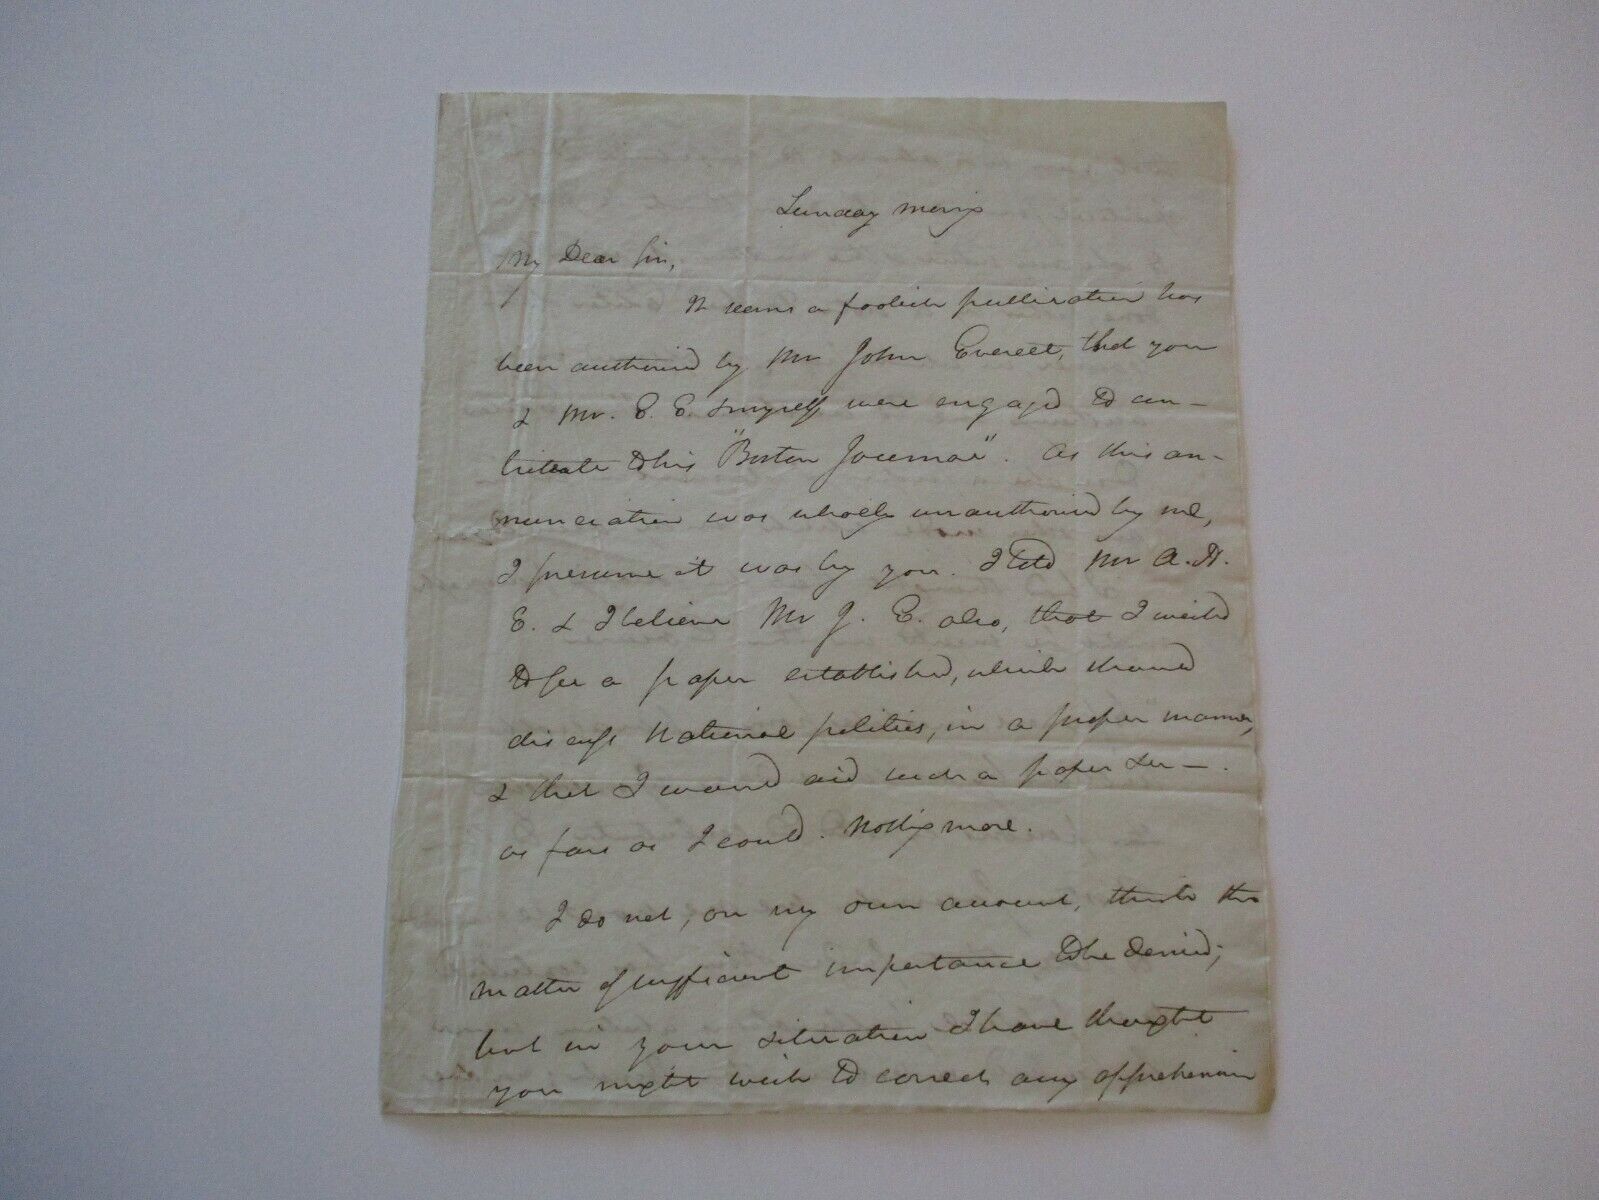 ANTIQUE  LETTER DOCUMENT FROM SECRETARY OF STATE DANIEL WEBSTER TO JOSEPH STORY